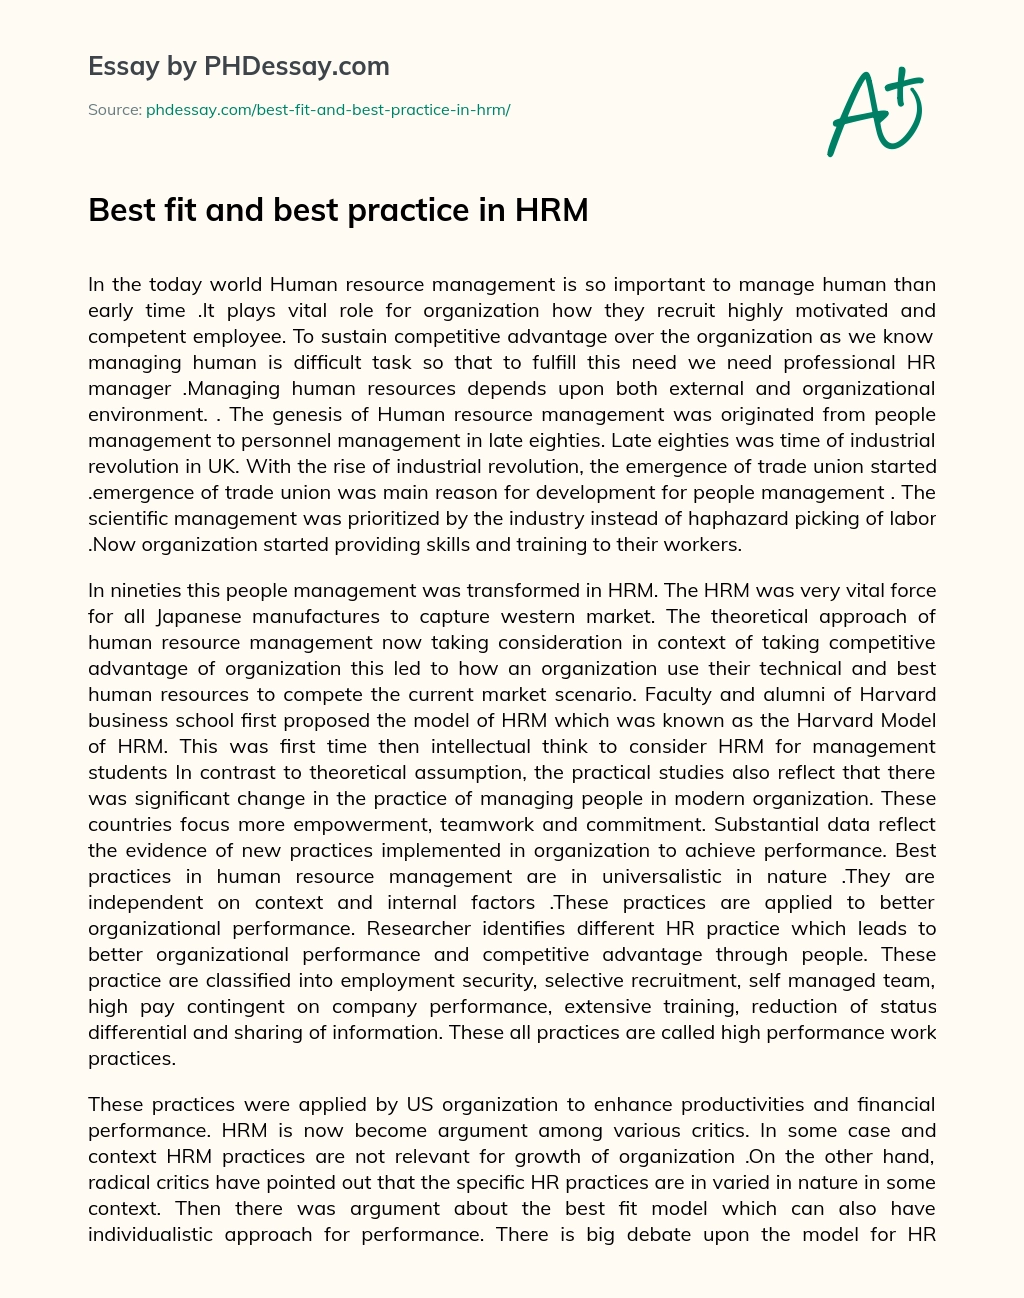 Best fit and best practice in HRM essay